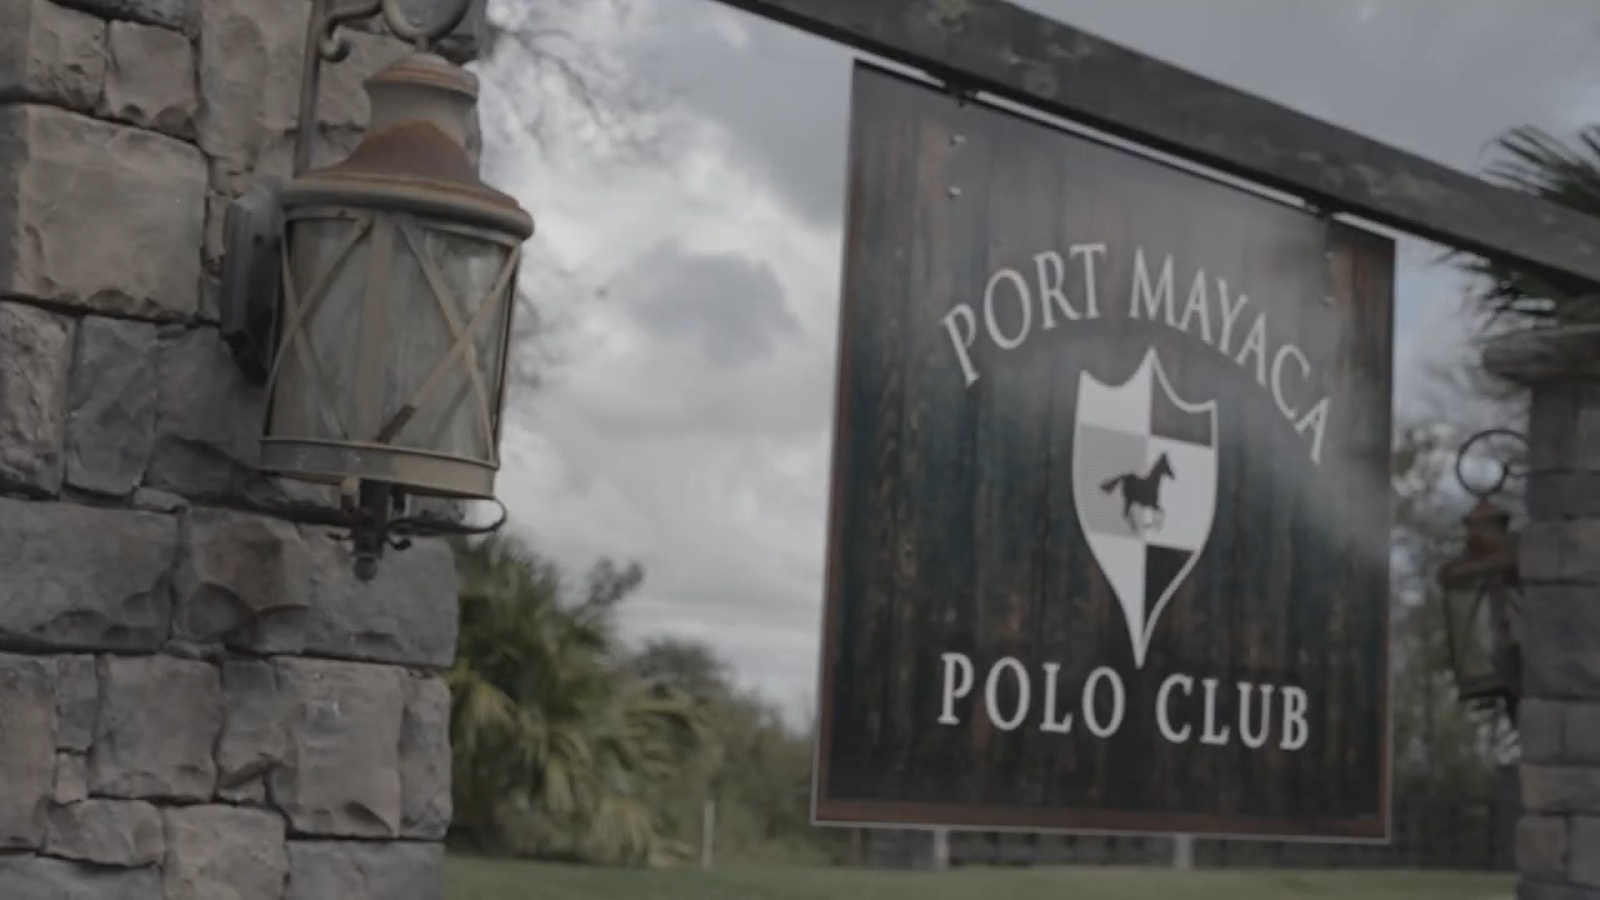 signboard Port Mayaca polo club and street light on the left side